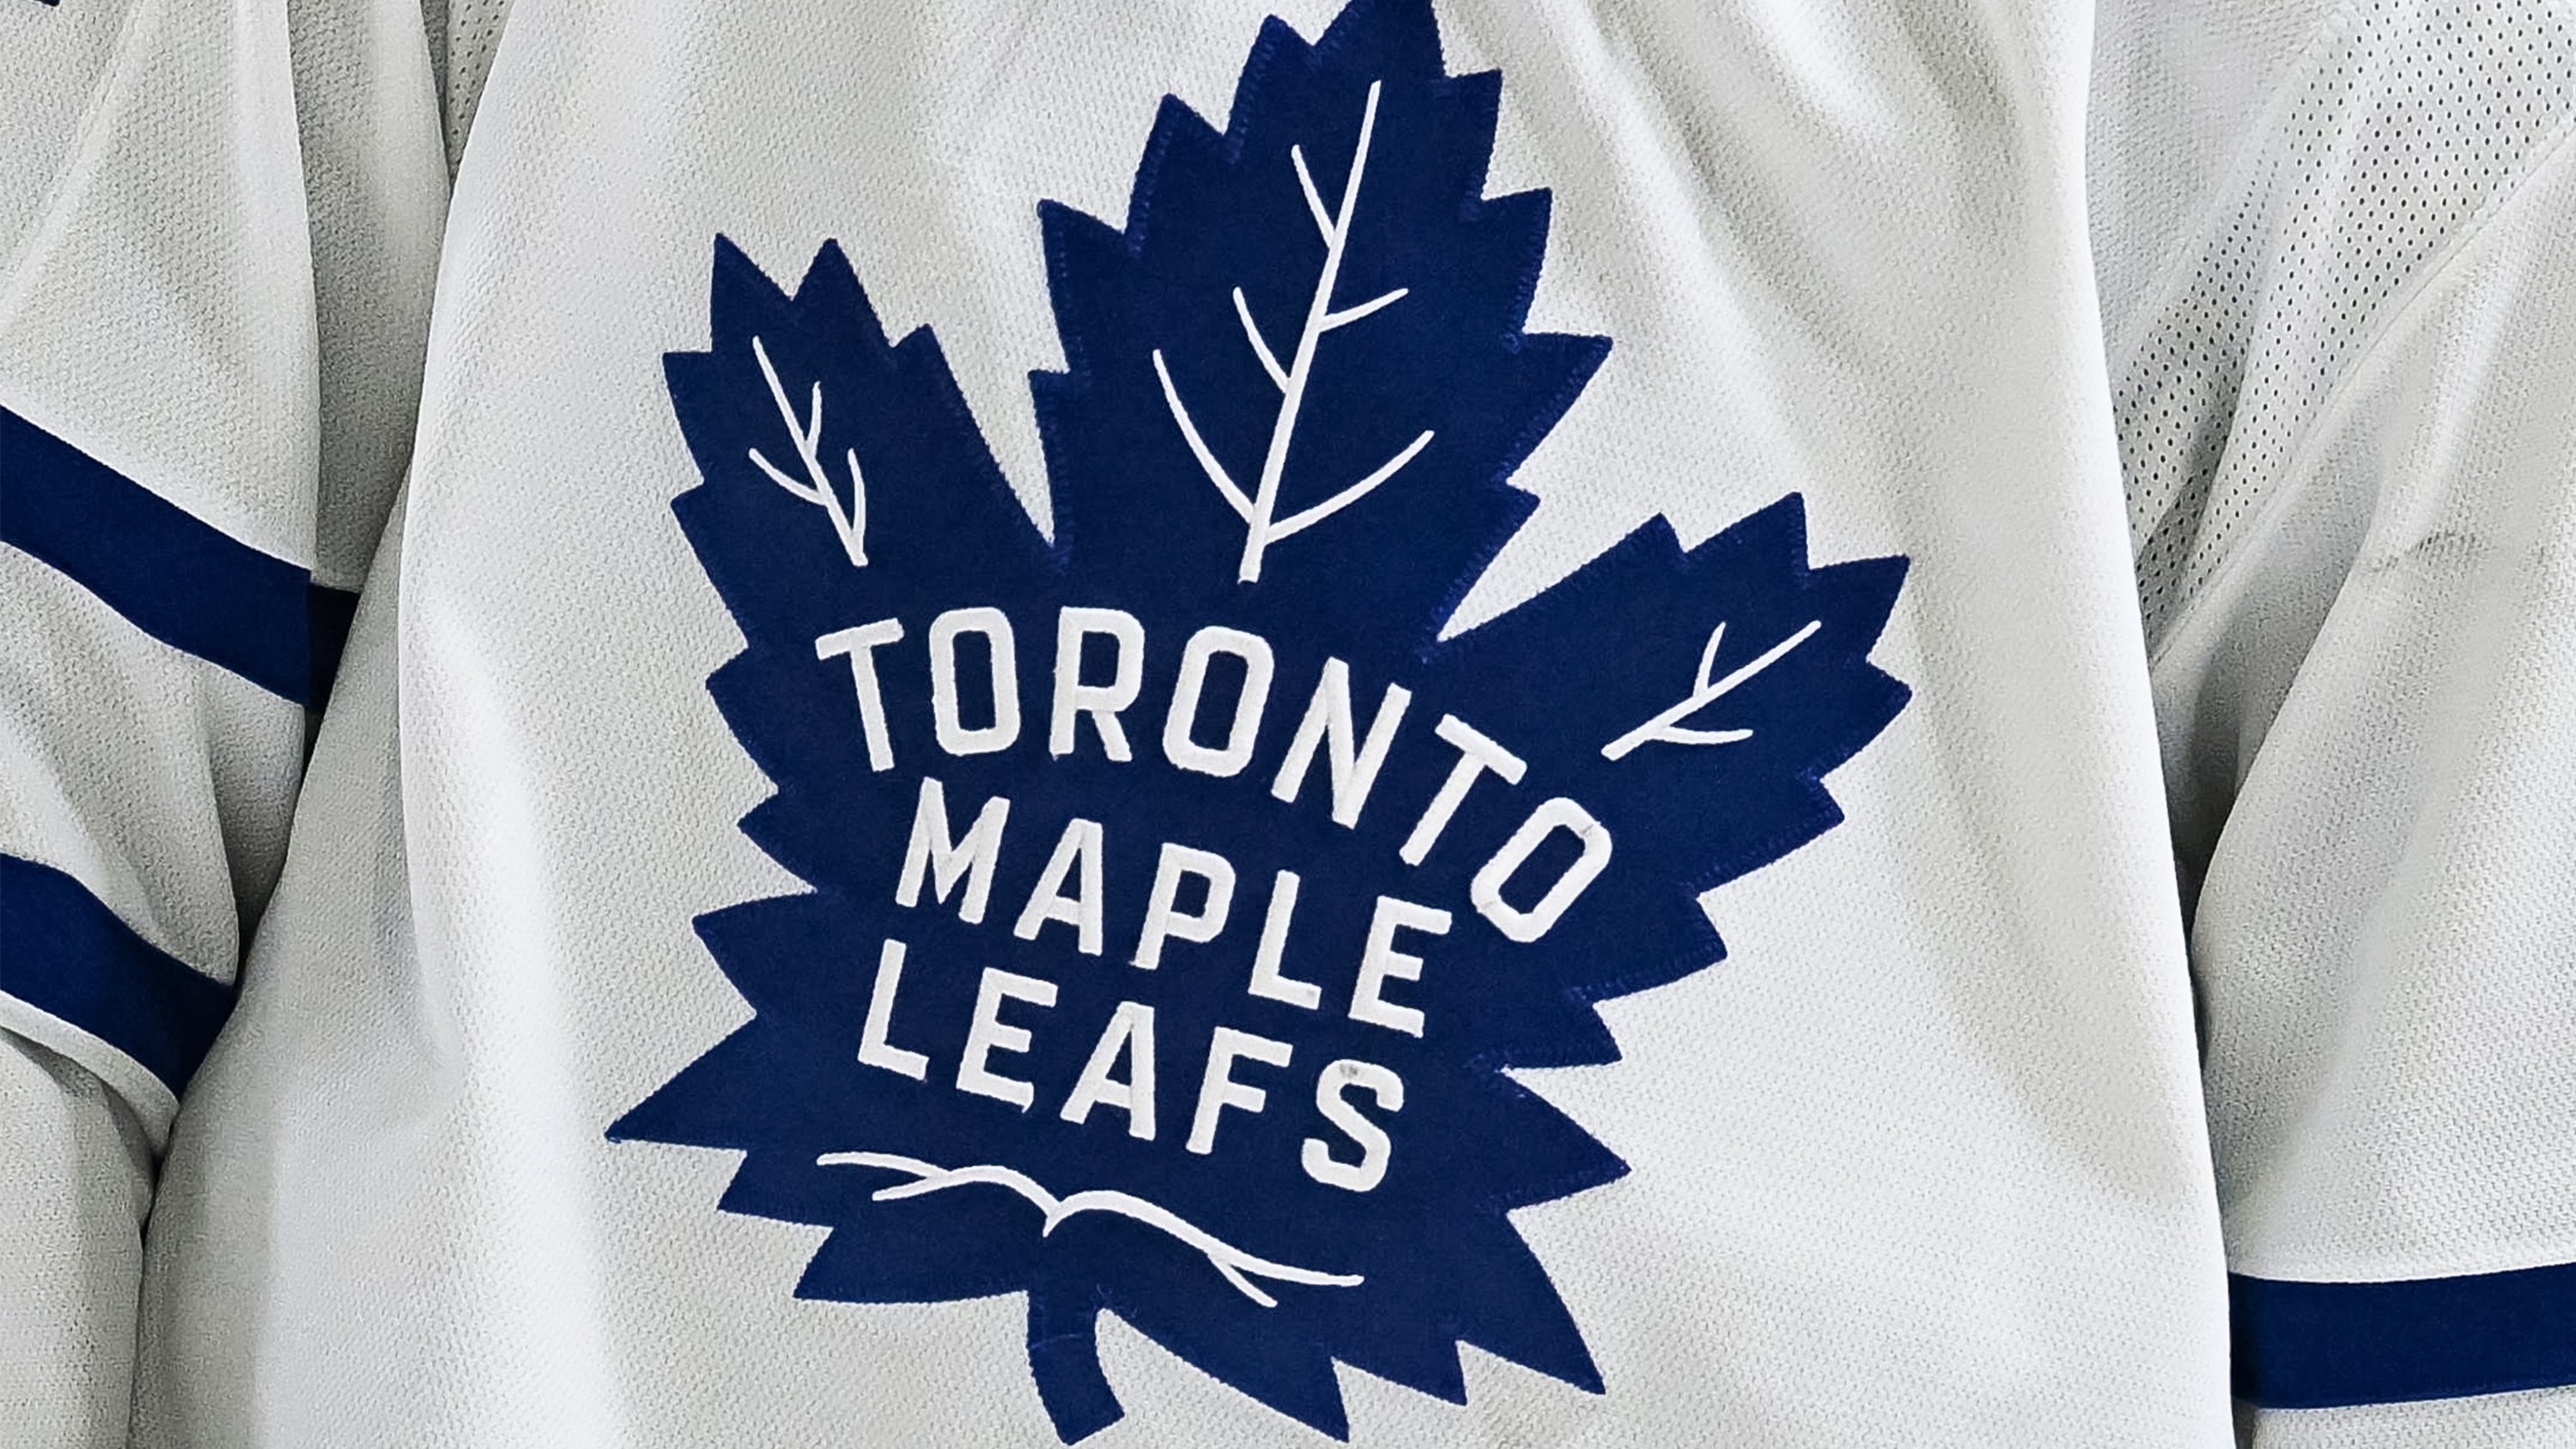 The new Toronto Arenas jerseys : r/leafs